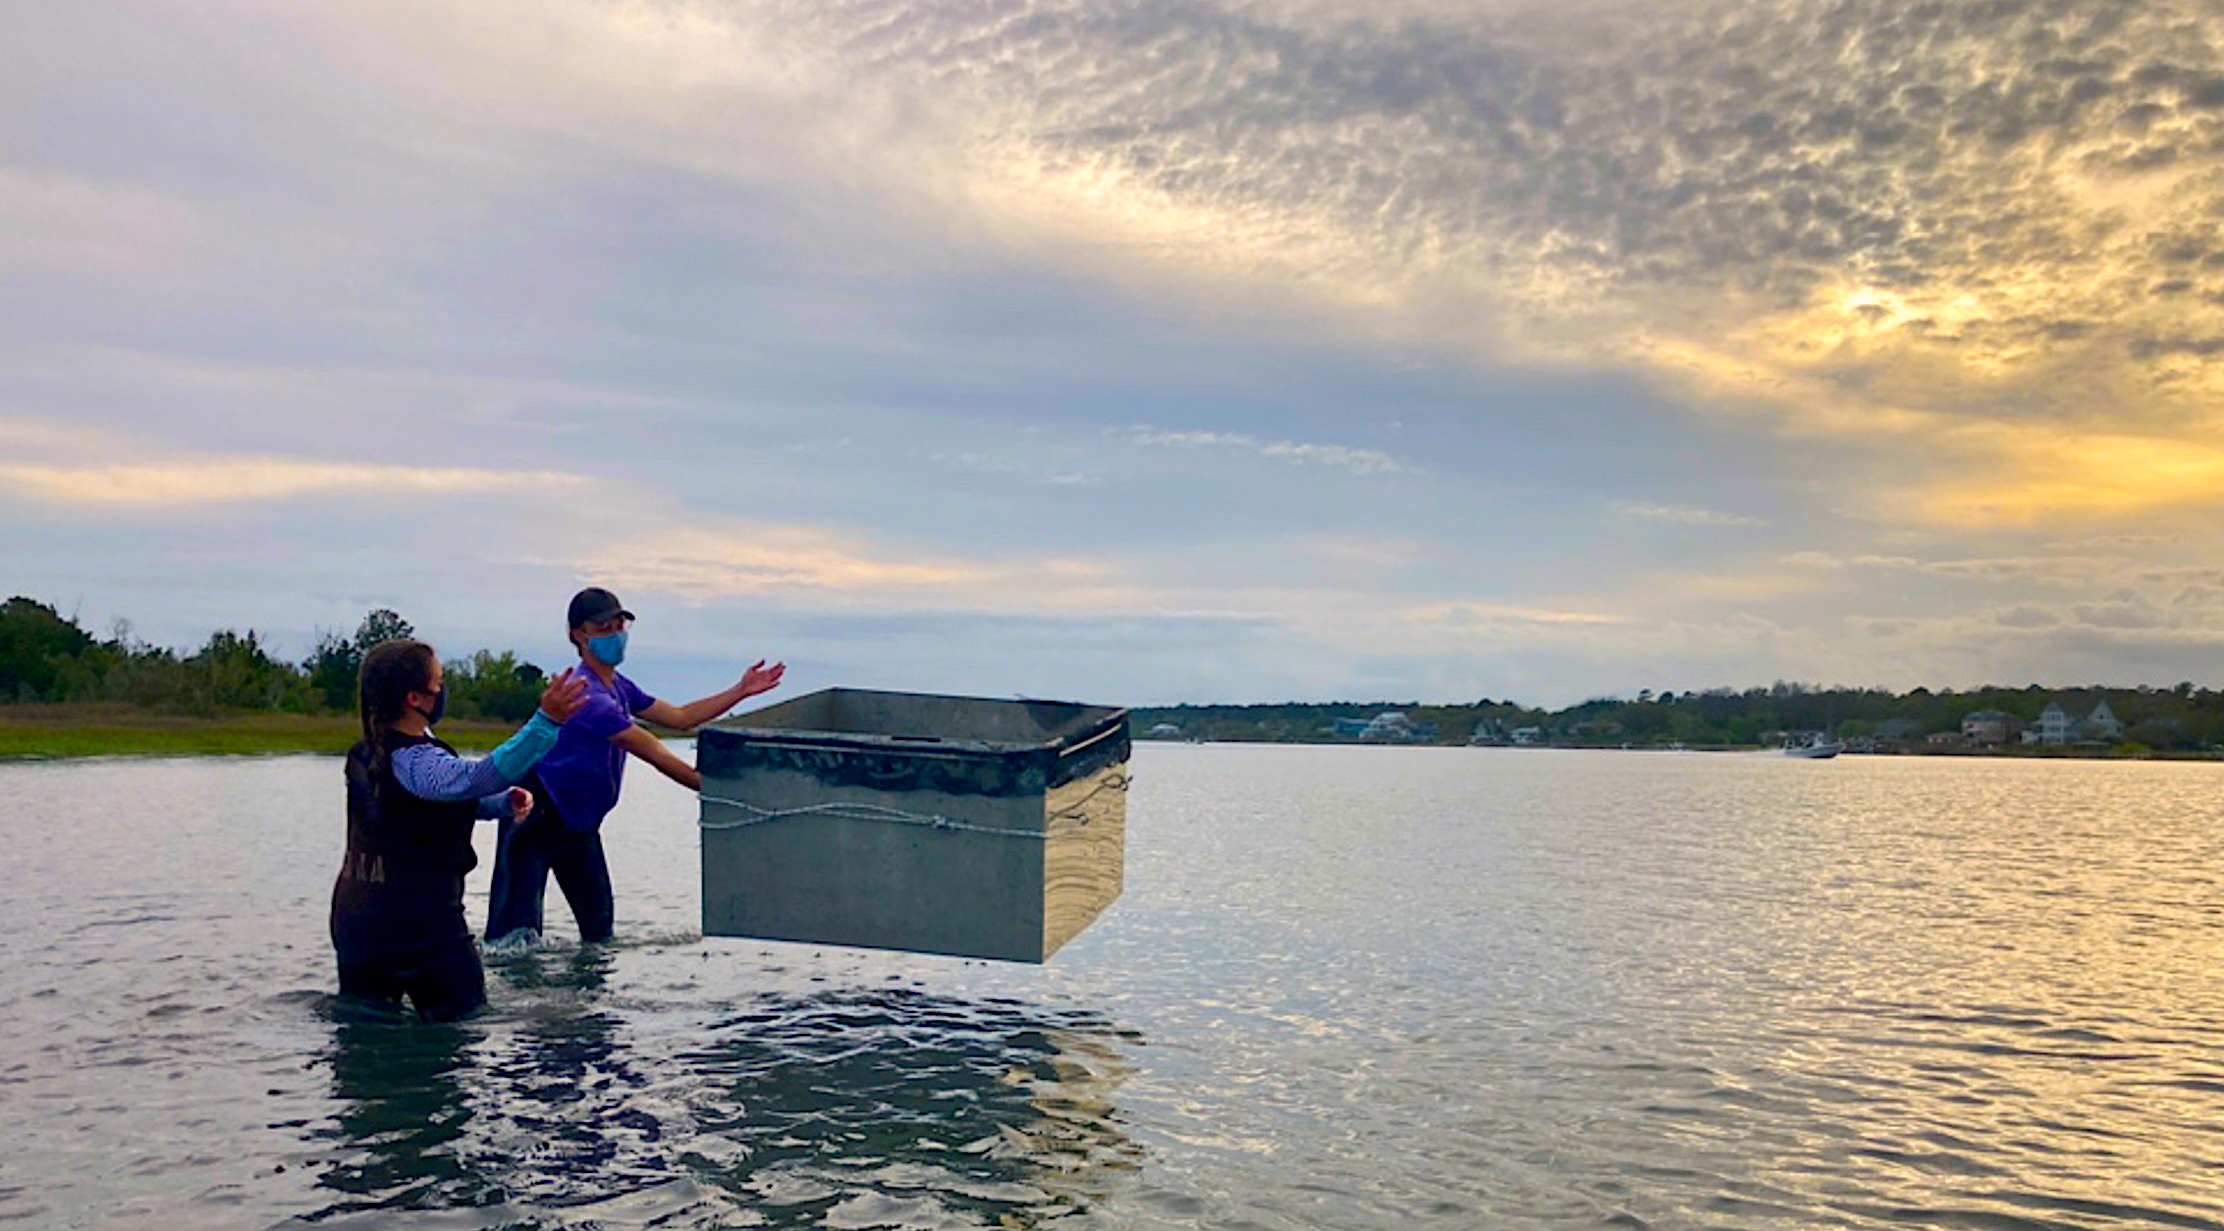 image: Researchers deploy throw traps over seagrass patches to examine the abundance of juvenile blue crabs. Courtesy of the UNCW Coastal Plant Ecology Lab.